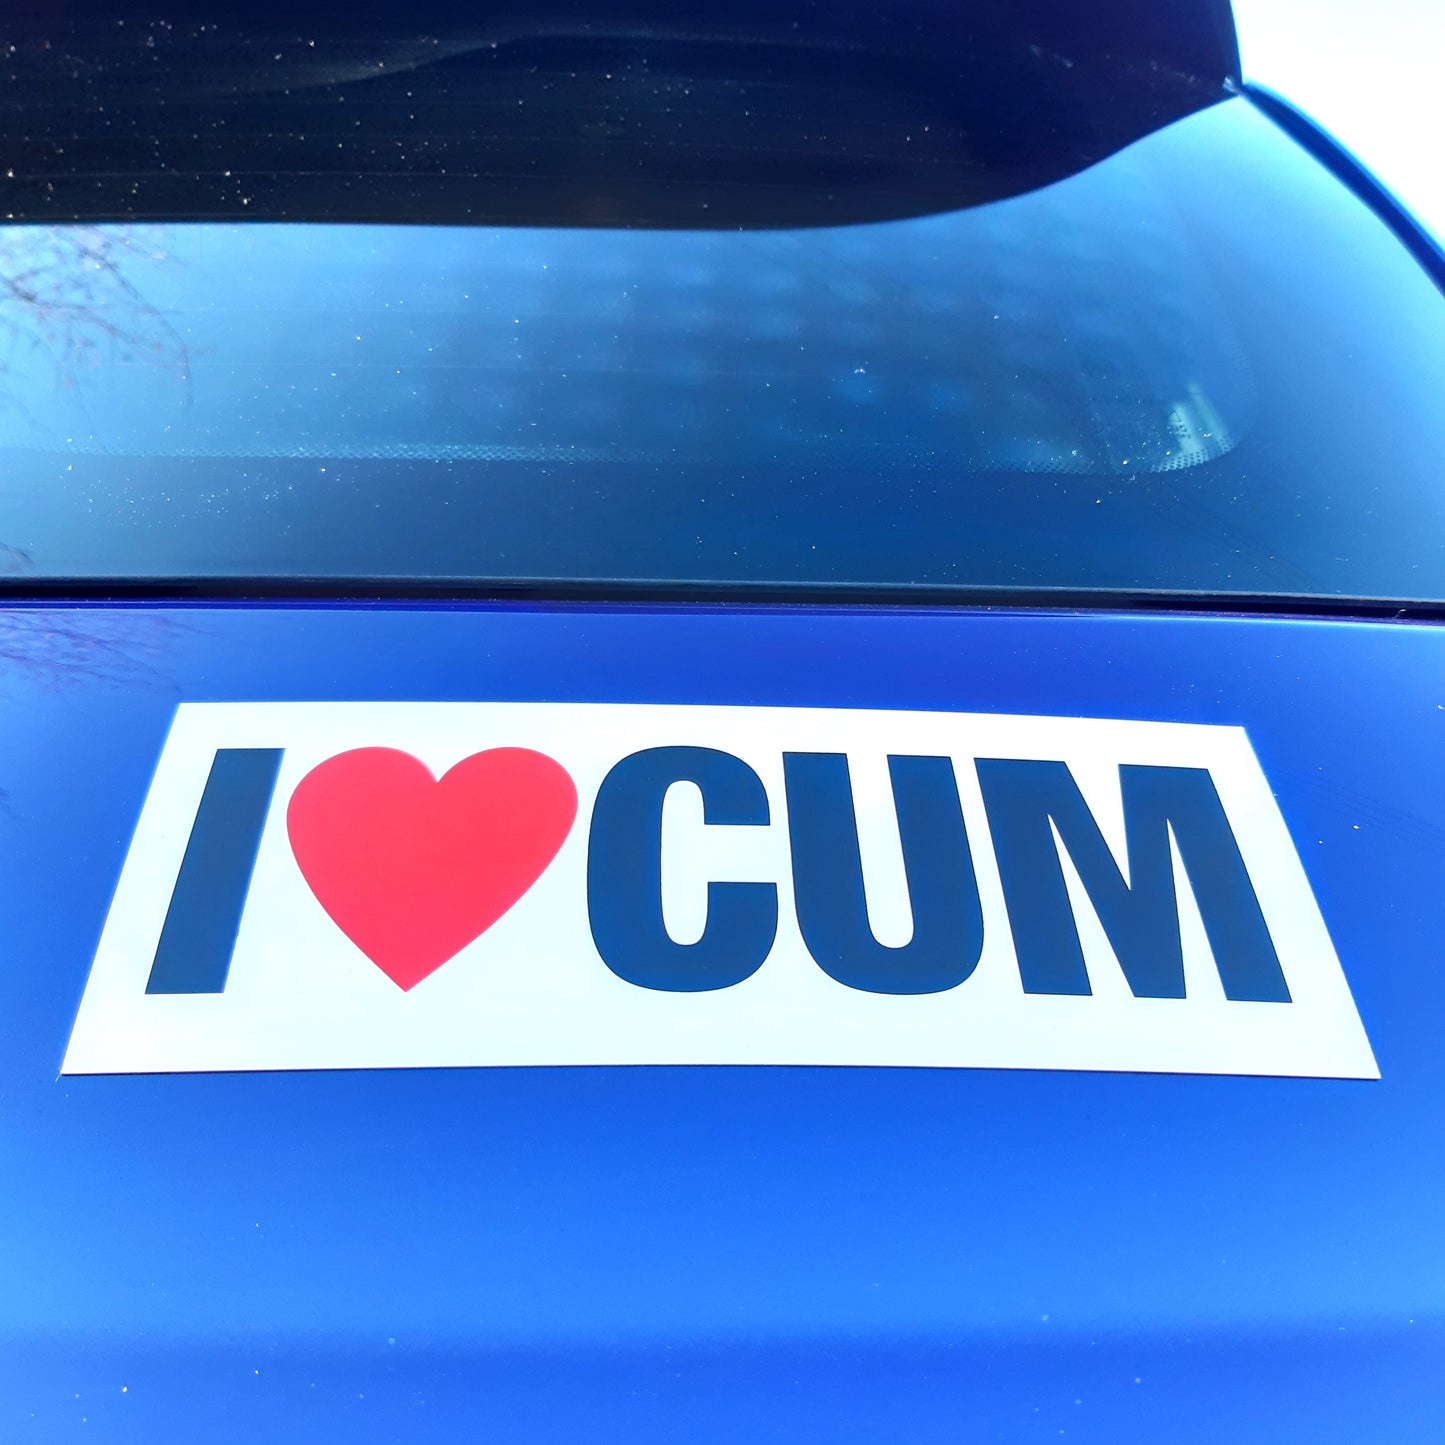 2 Joke Magnetic Car Stickers With "I LOVE CUM"